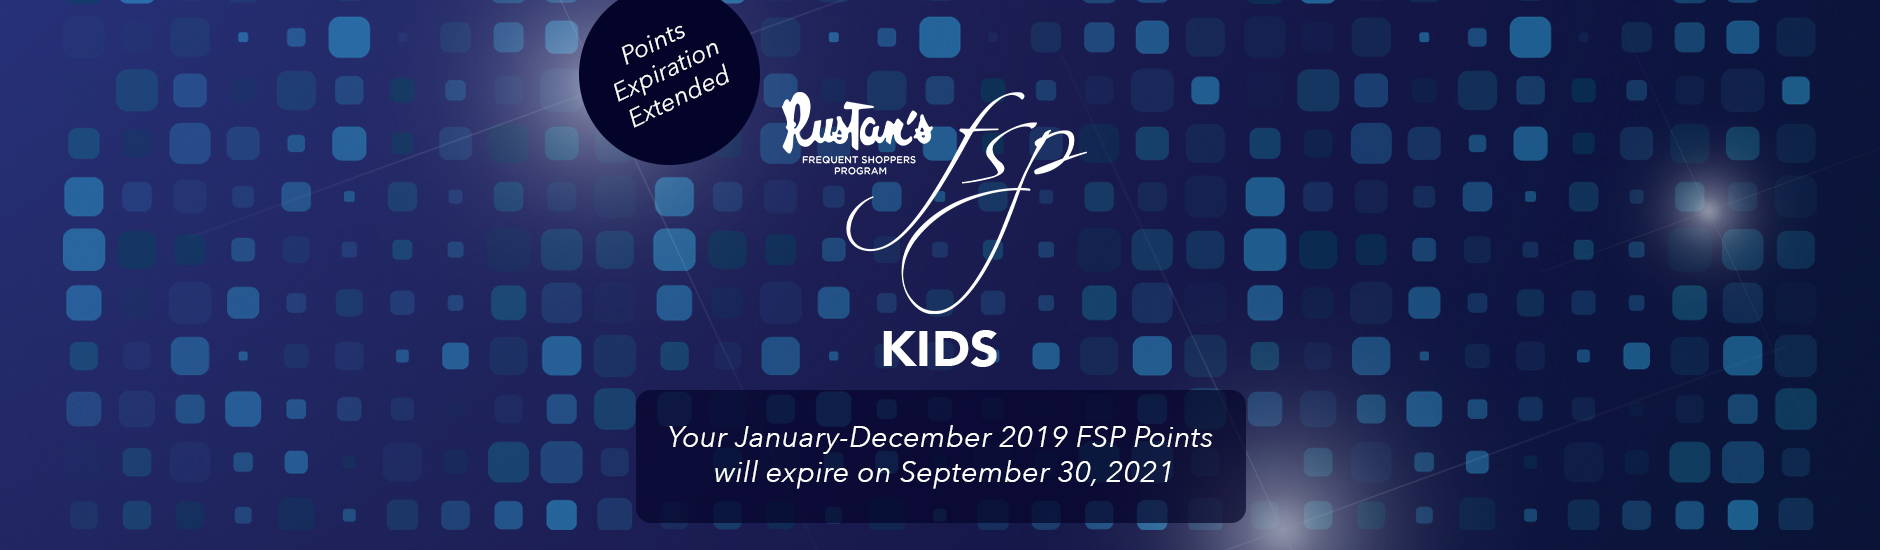 EXTENDED: Your FSP Points Are Waiting - Kids